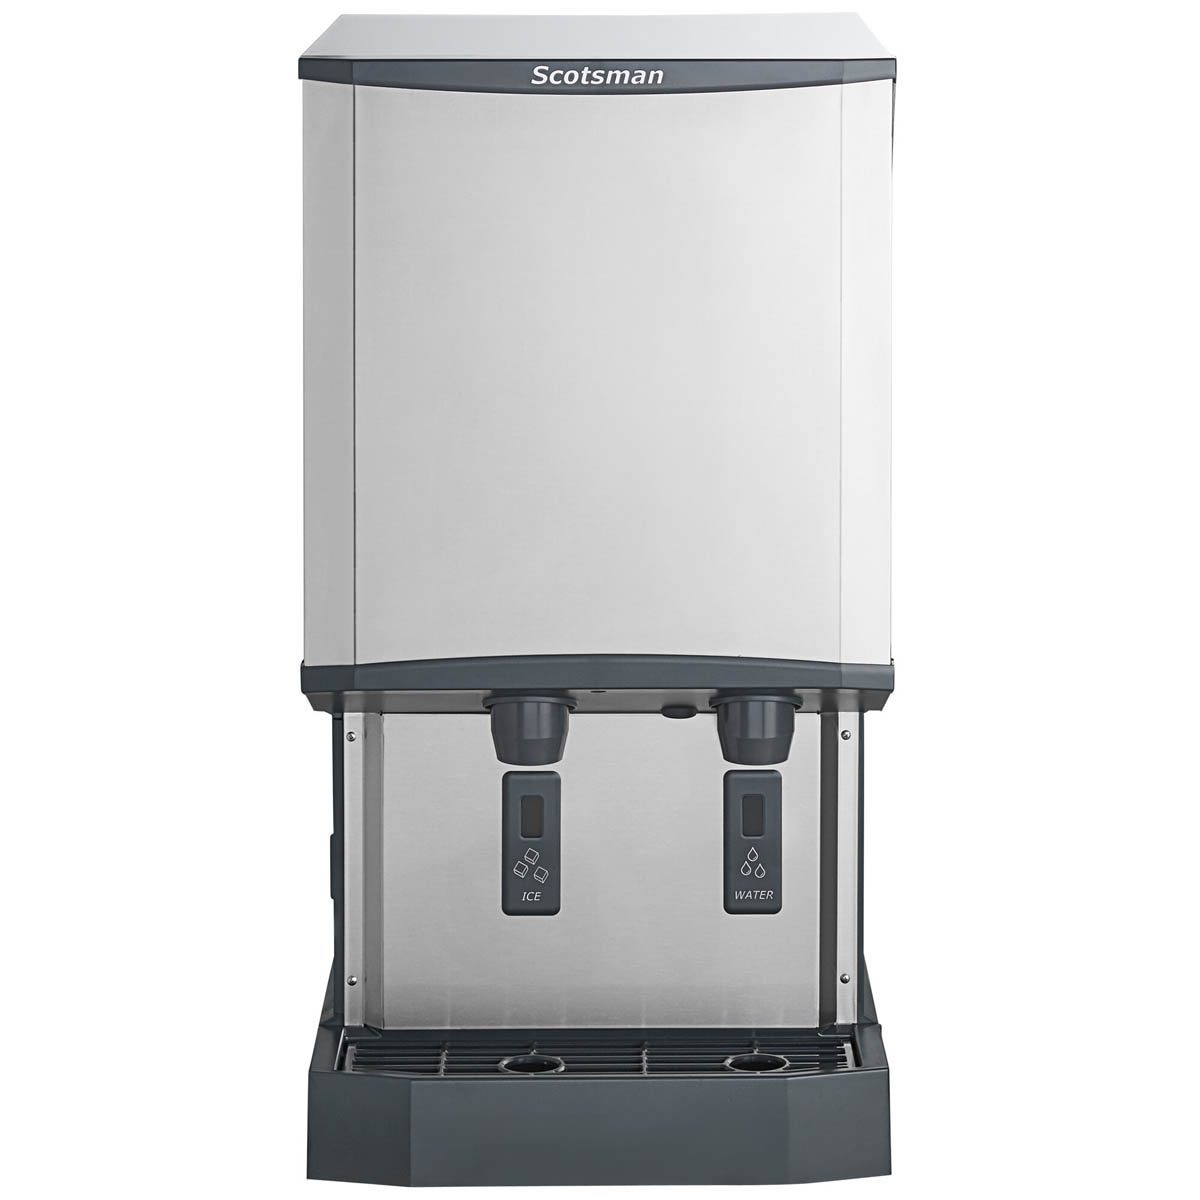 With Scotsman HID540W-1 Easy to Serve Ice For Your Customers, Chef's Deal